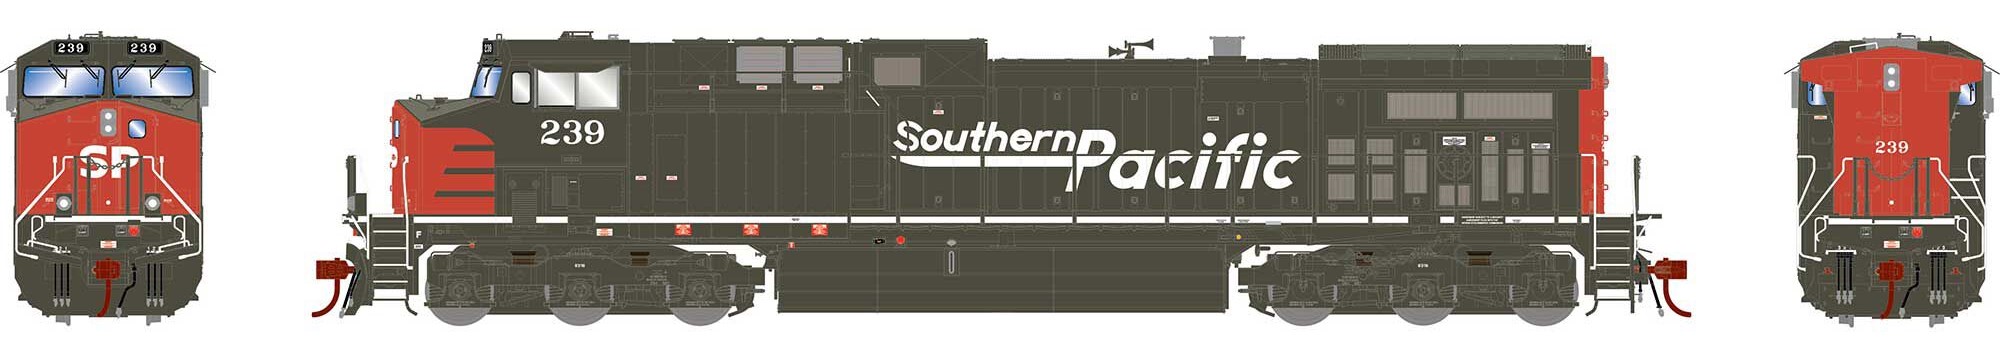 Athearn Genesis 2.0 HO ATHG31557 DCC Ready GE AC4400CW Locomotive Southern Pacific SP #239